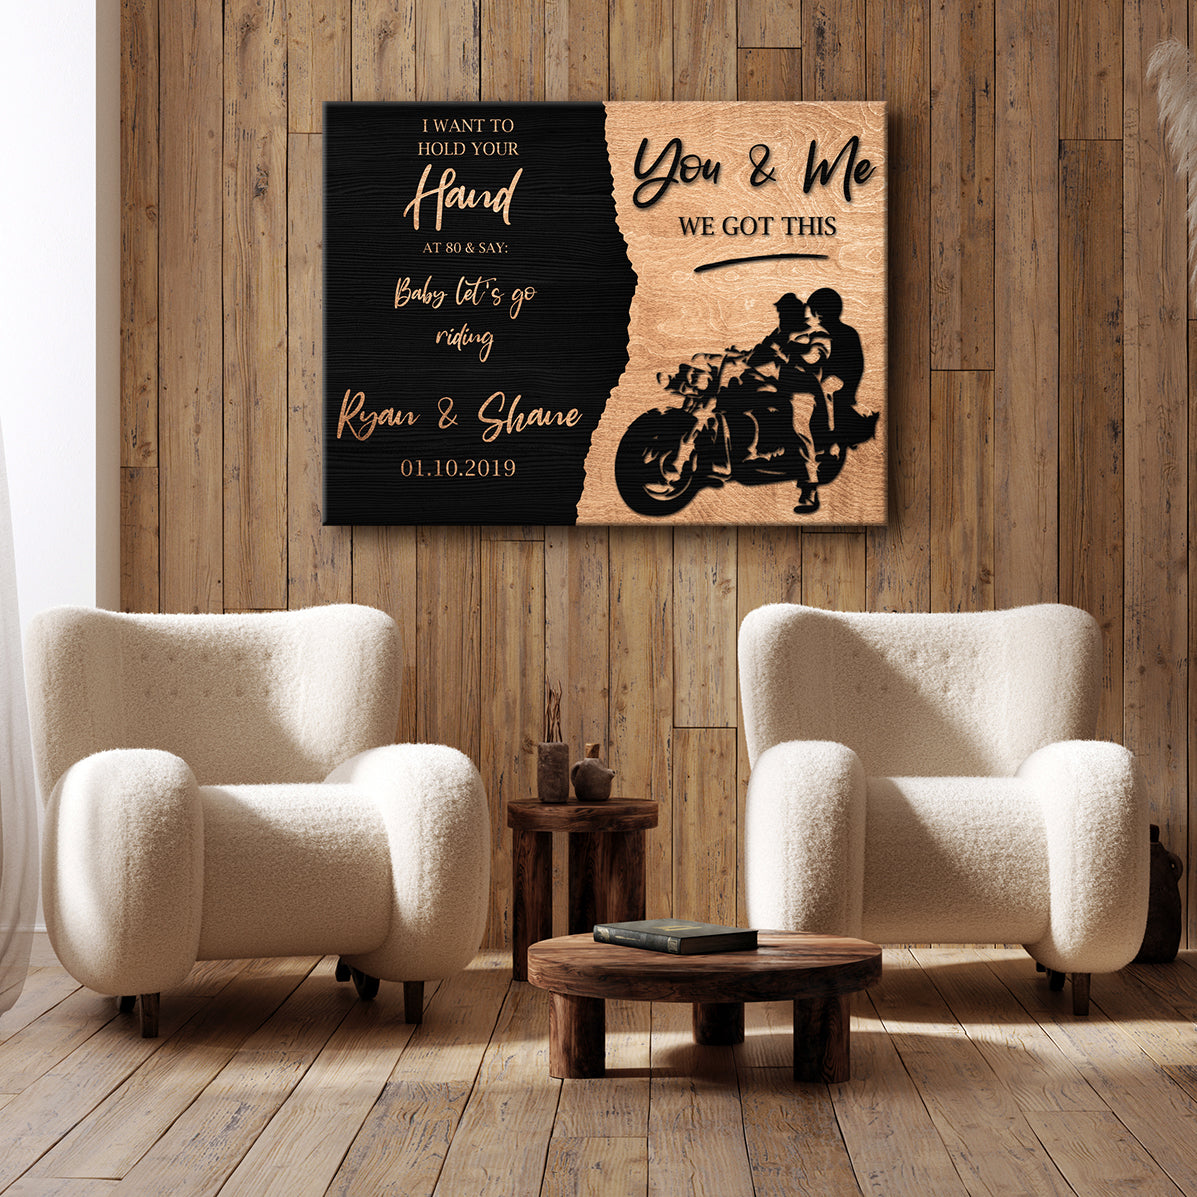 We Got This Bikers Couple Sign - Image by Tailored Canvases